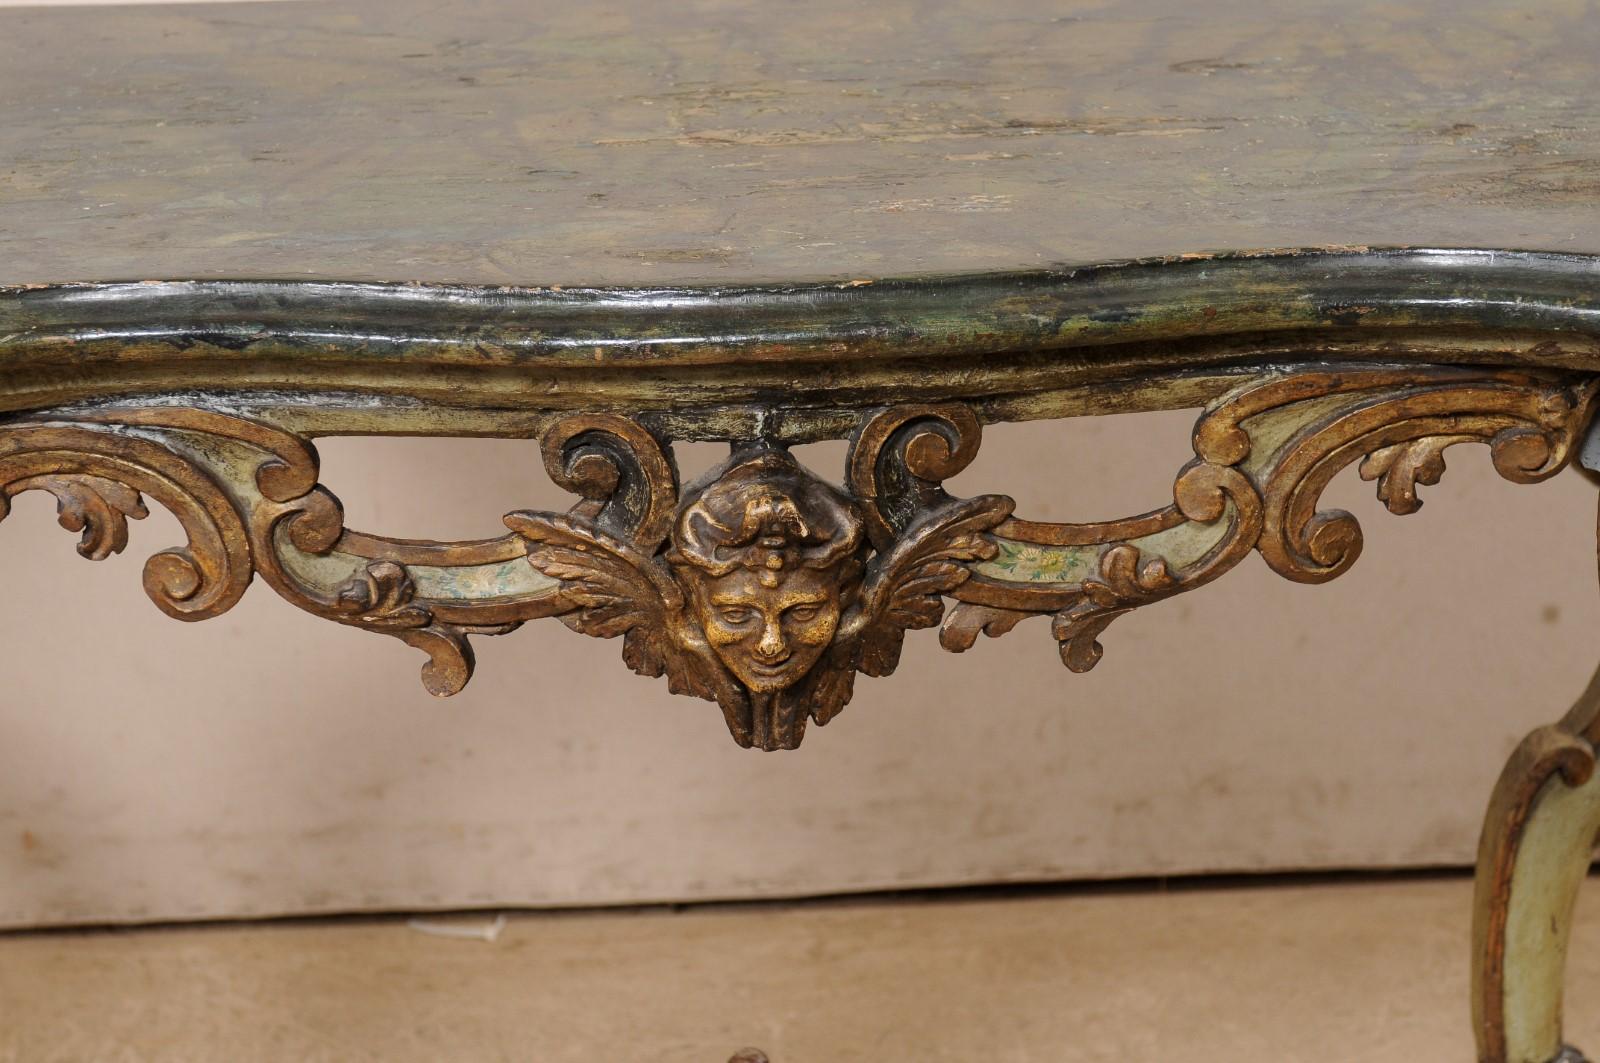 Exquisite Pair of 18th C. Italian Venetian Carved & Painted Wood Console Tables For Sale 2